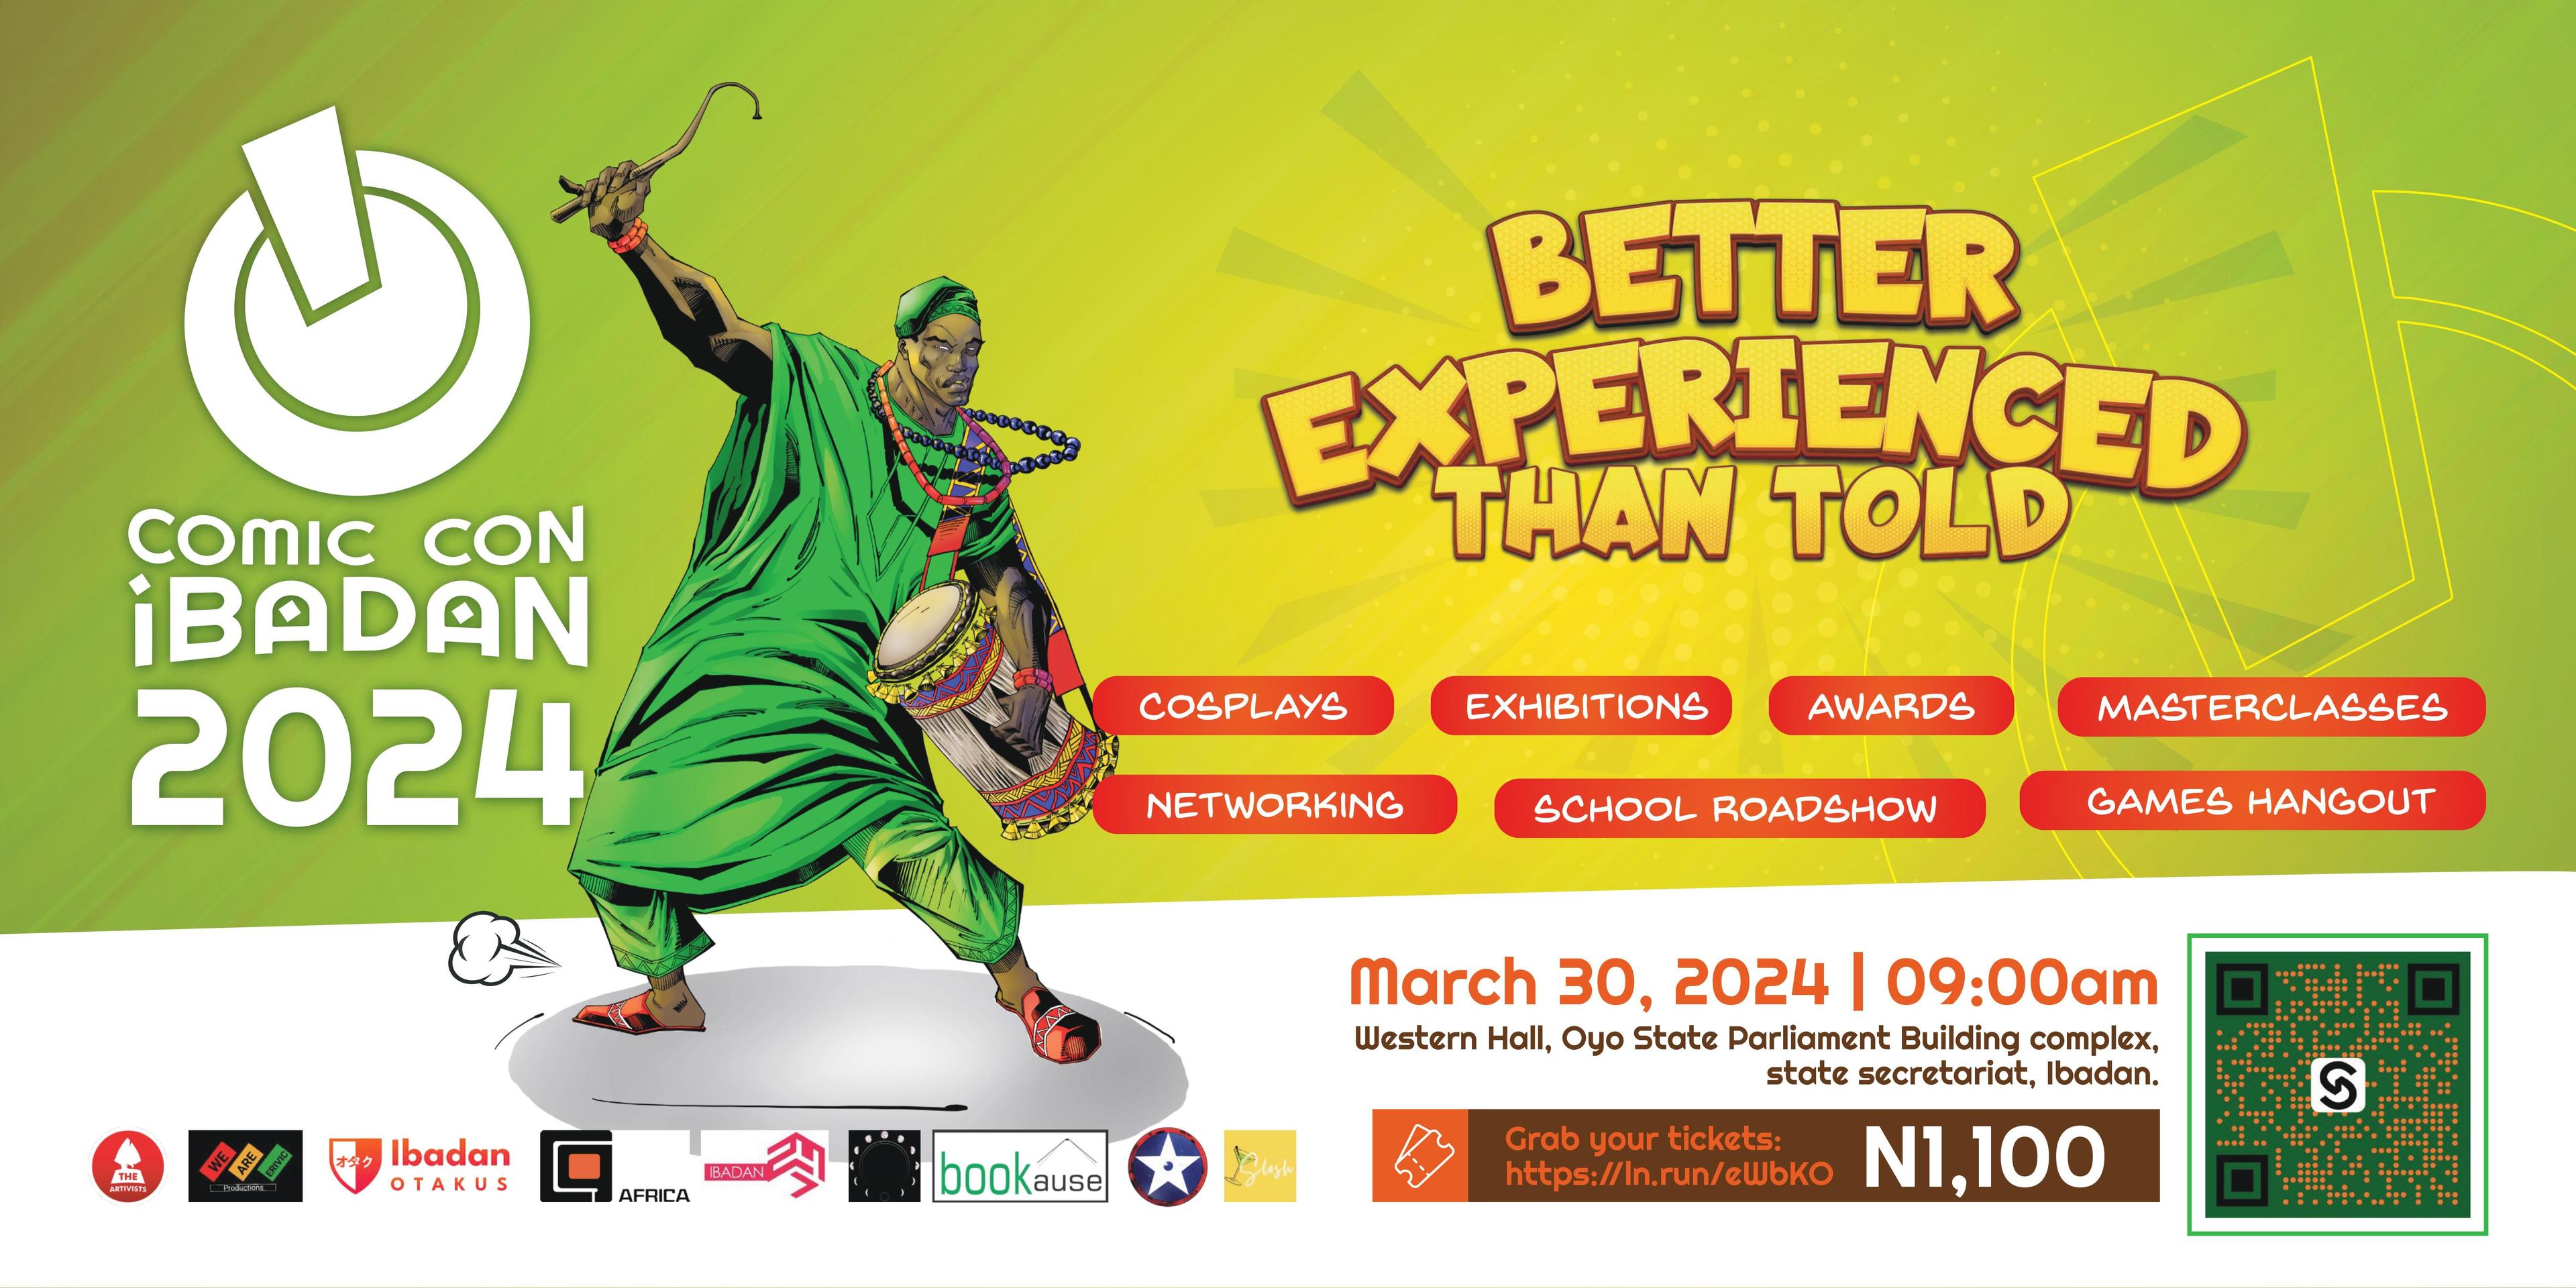 Comic Con Ibadan 2024! Happening on the 3oth of March! Better Experienced Than Told! | CGAfrica